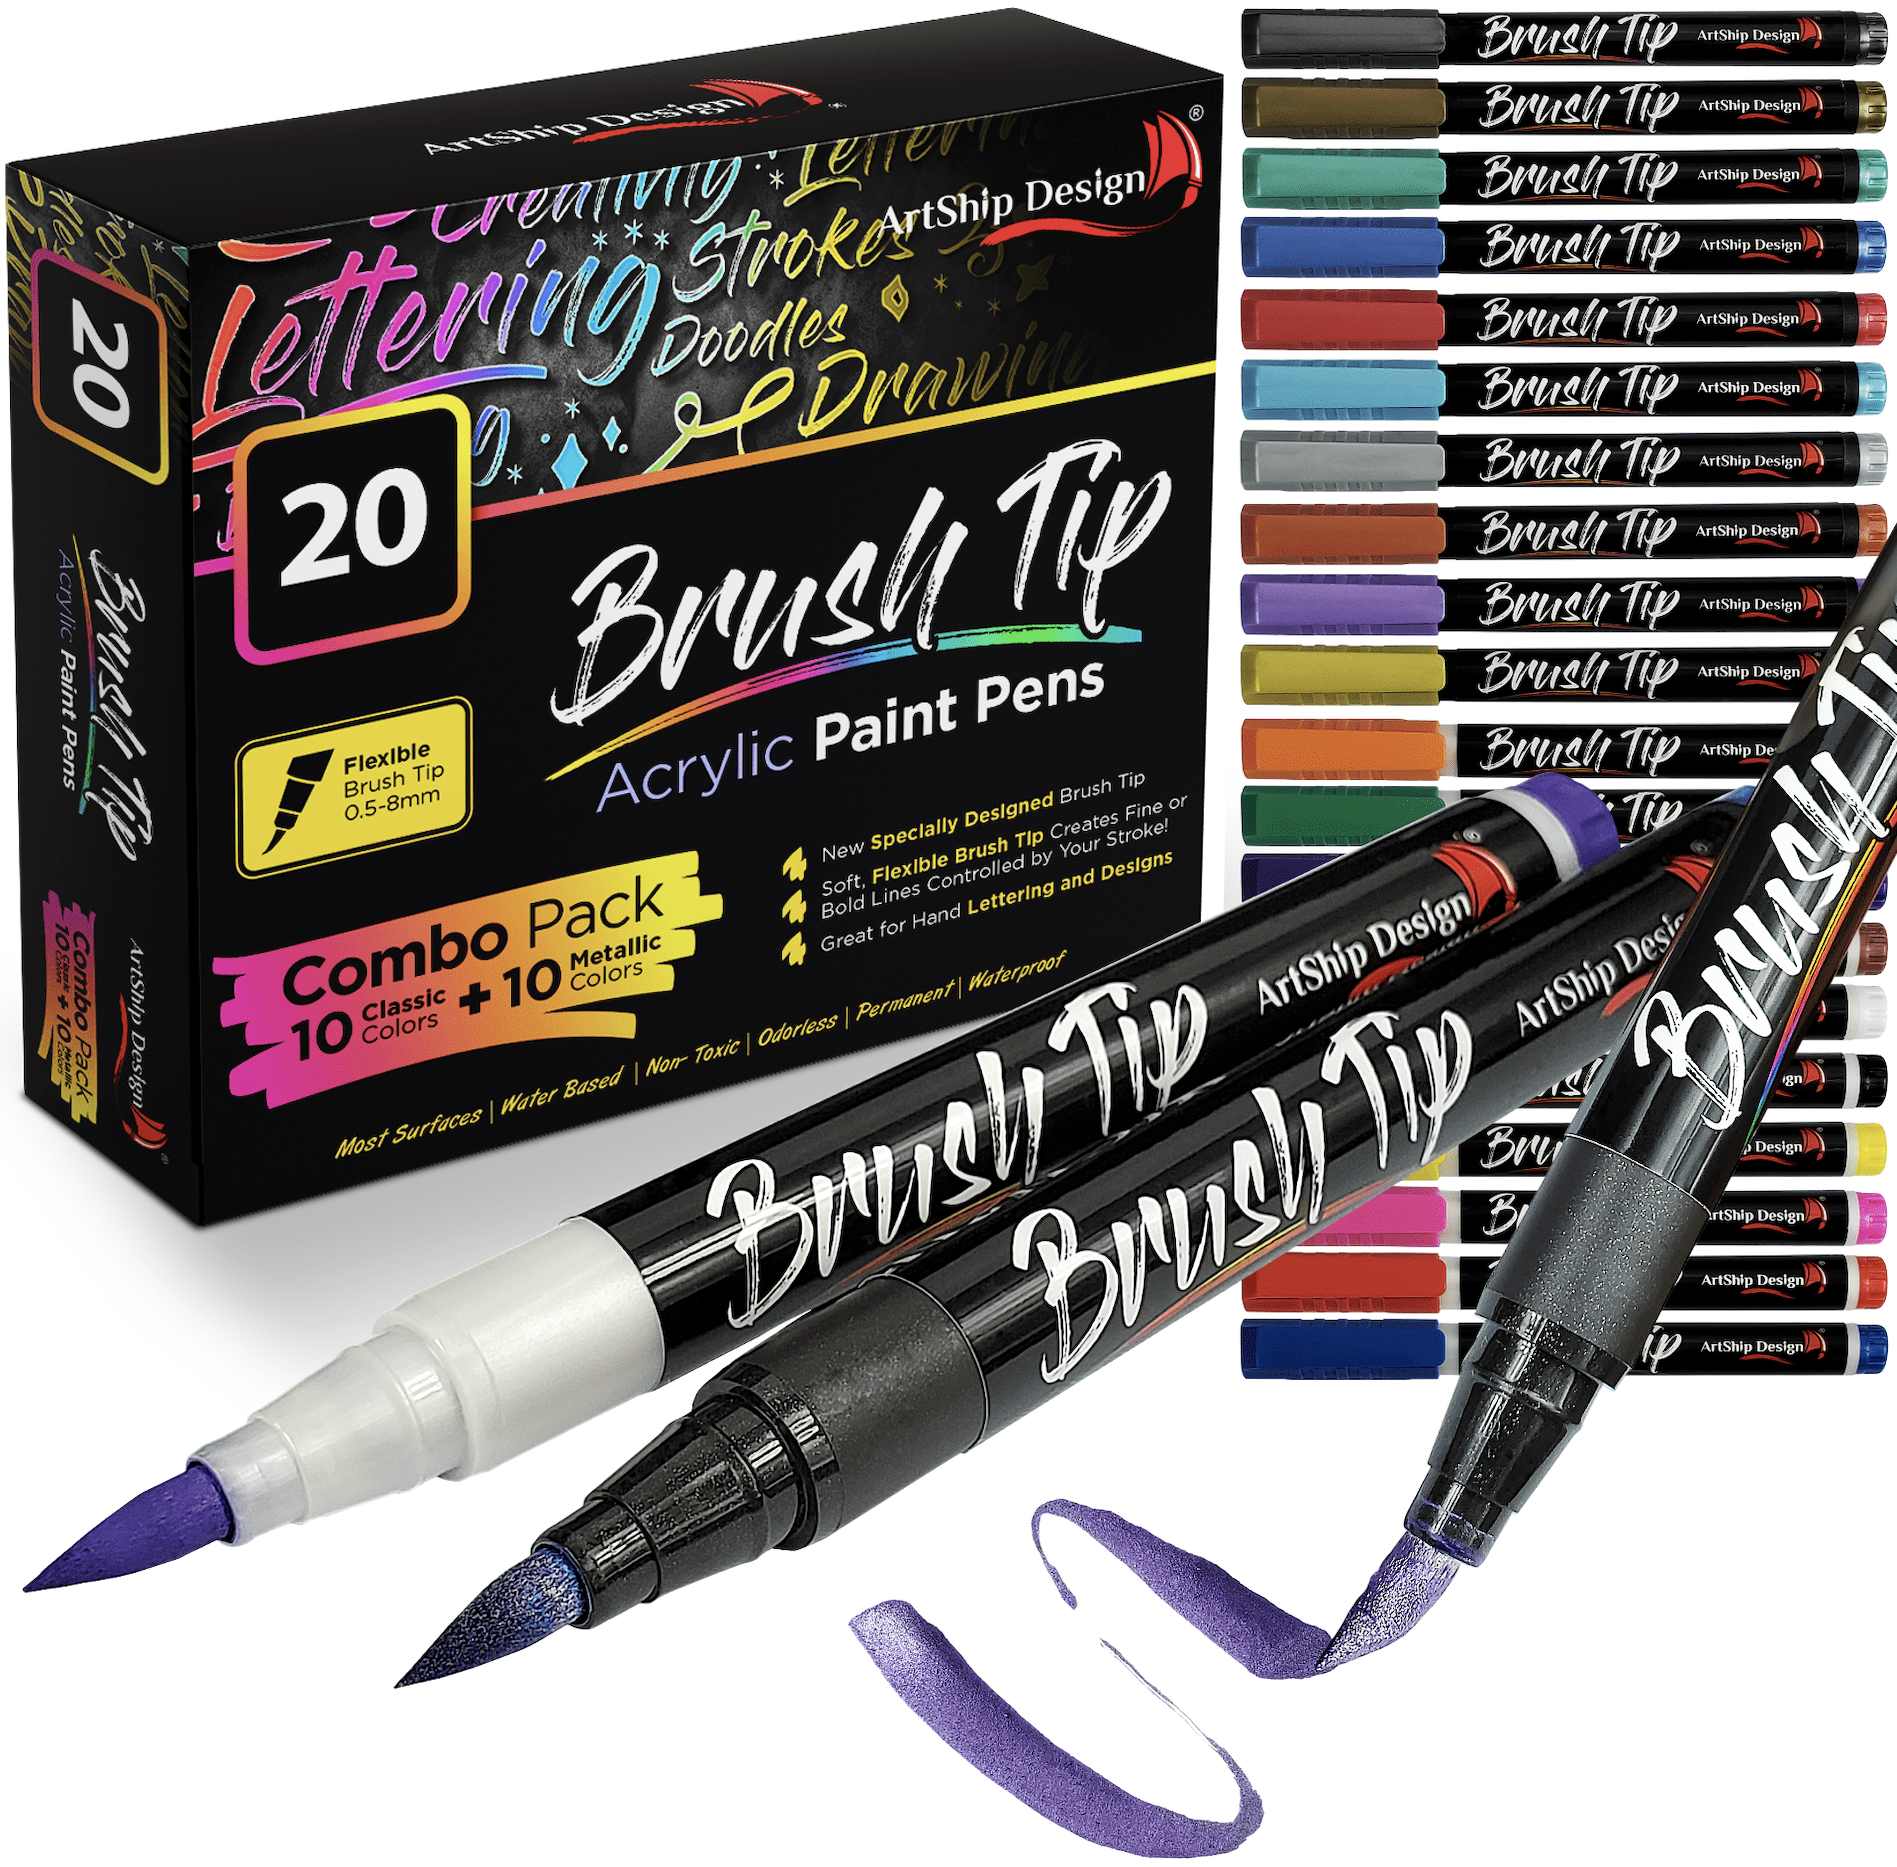 30 Watercolor Brush Pens Combo Pack, 28 Colors 2 Water Brushes by ArtShip  Design 